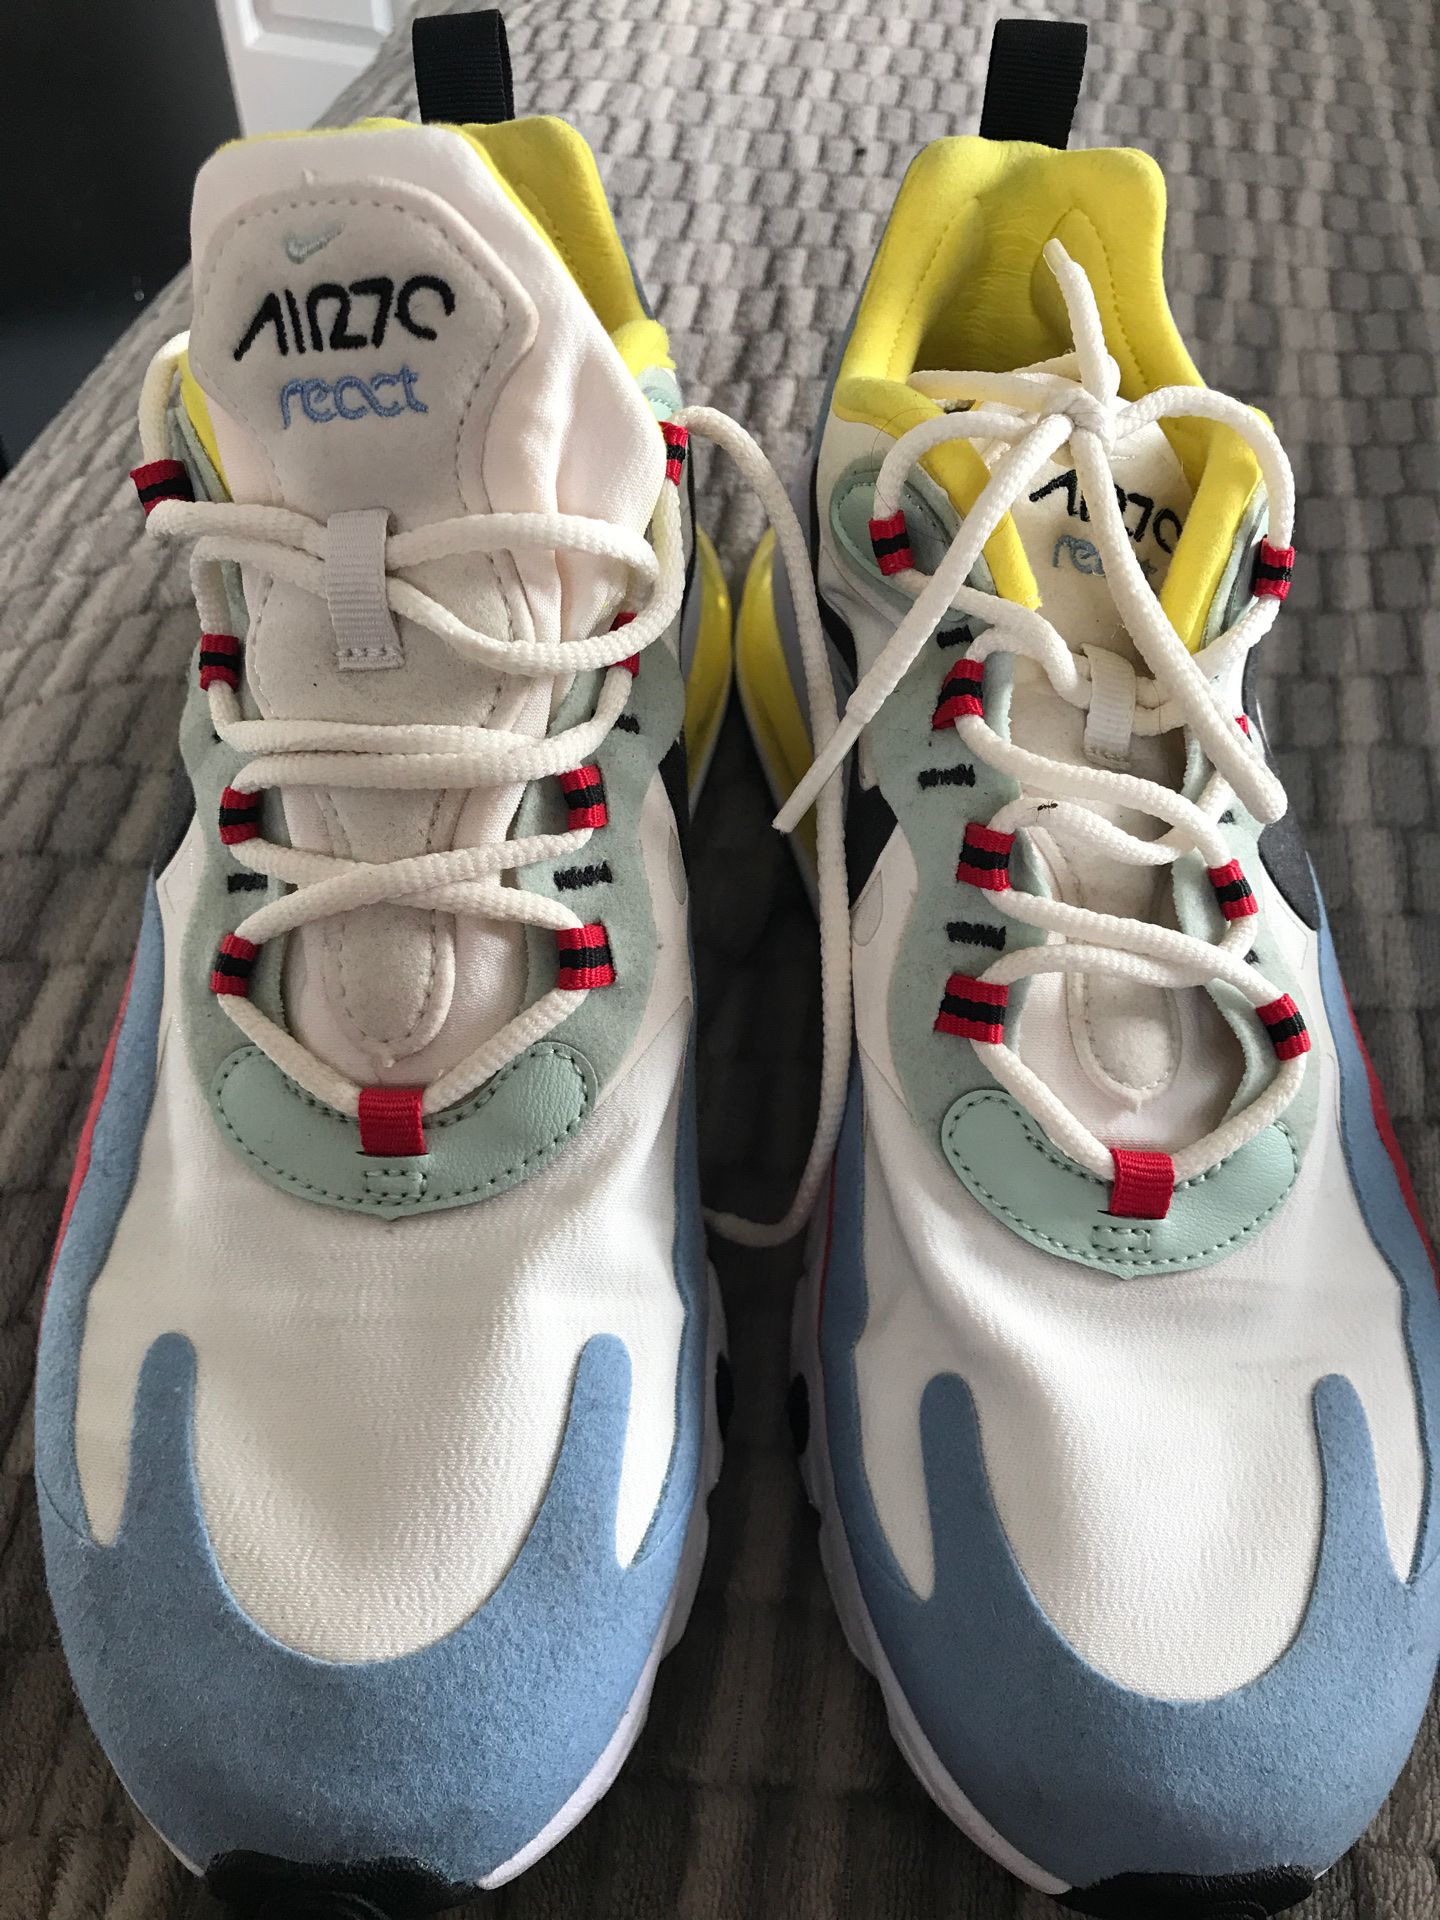 Nike react 270 excellent condition